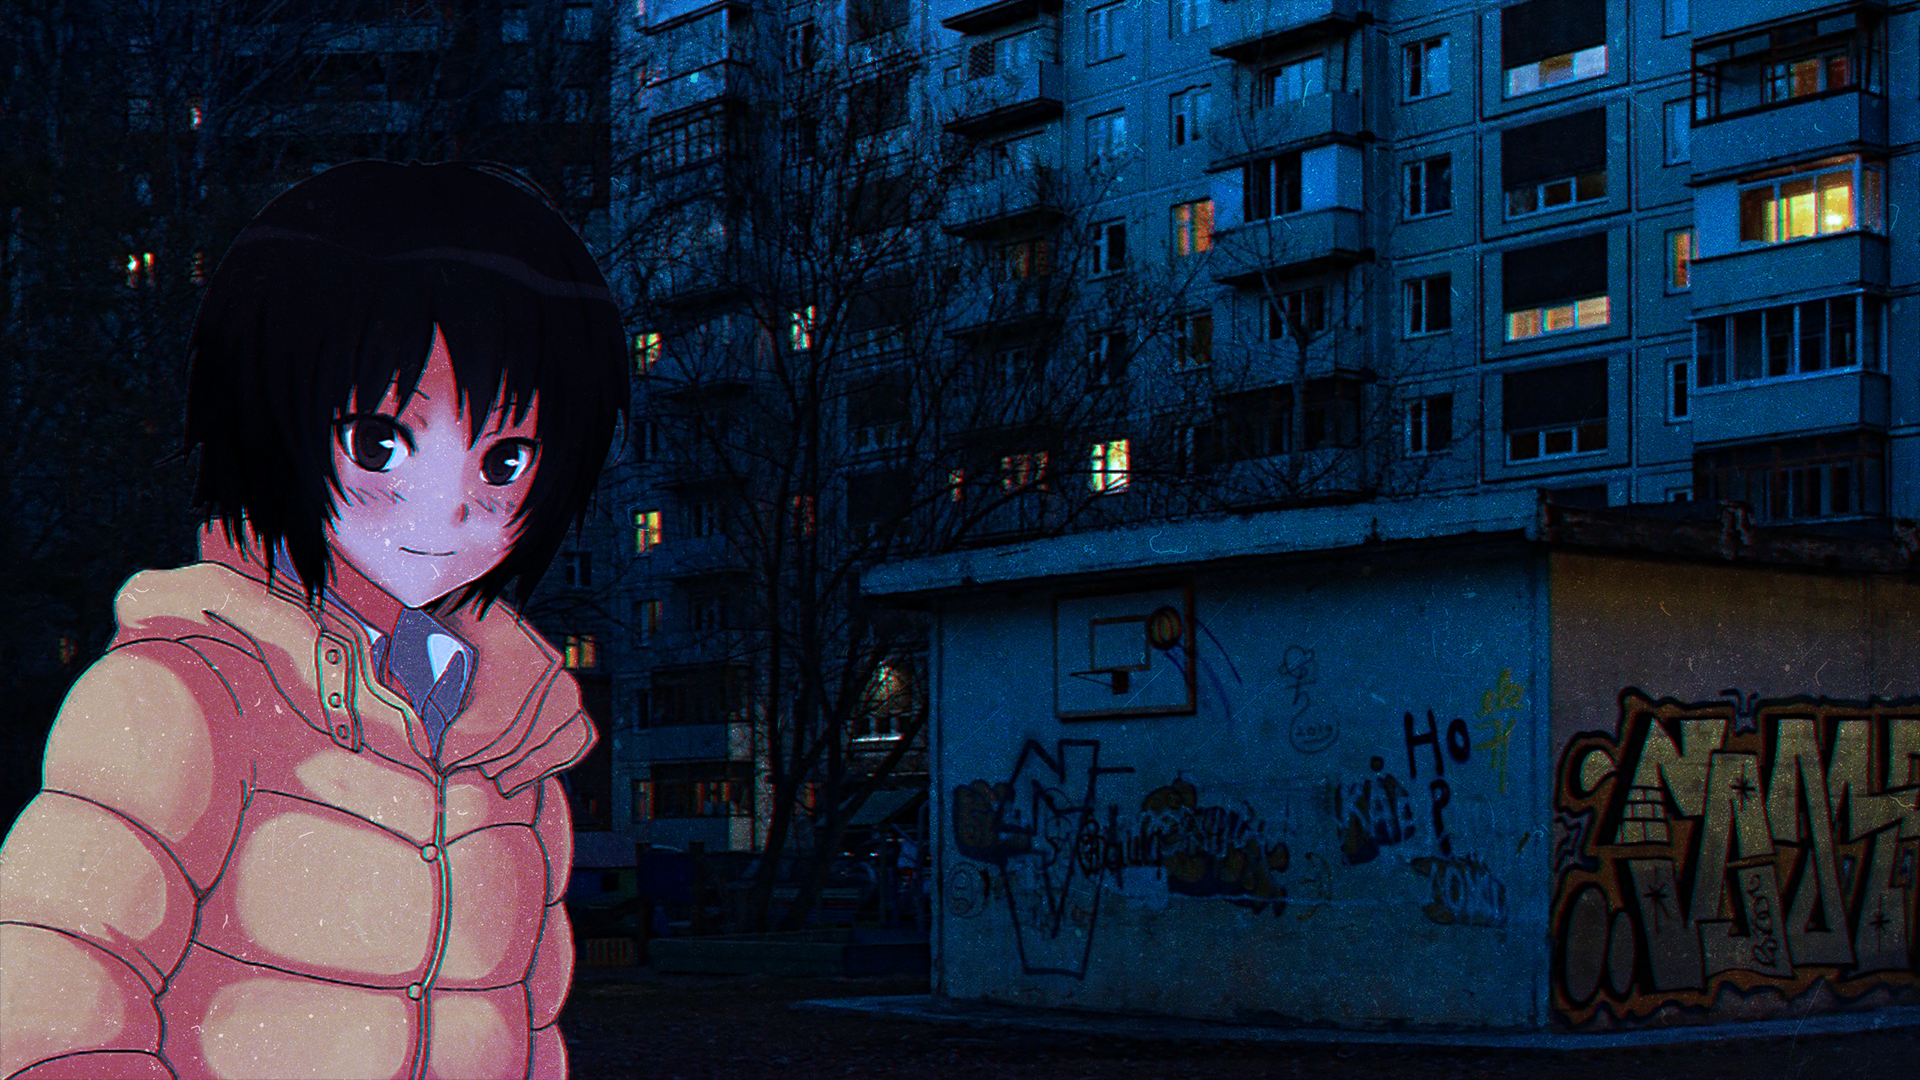 Real-world Russia is a surprisingly awesome backdrop for anime girl  Photoshop fan art【Photos】